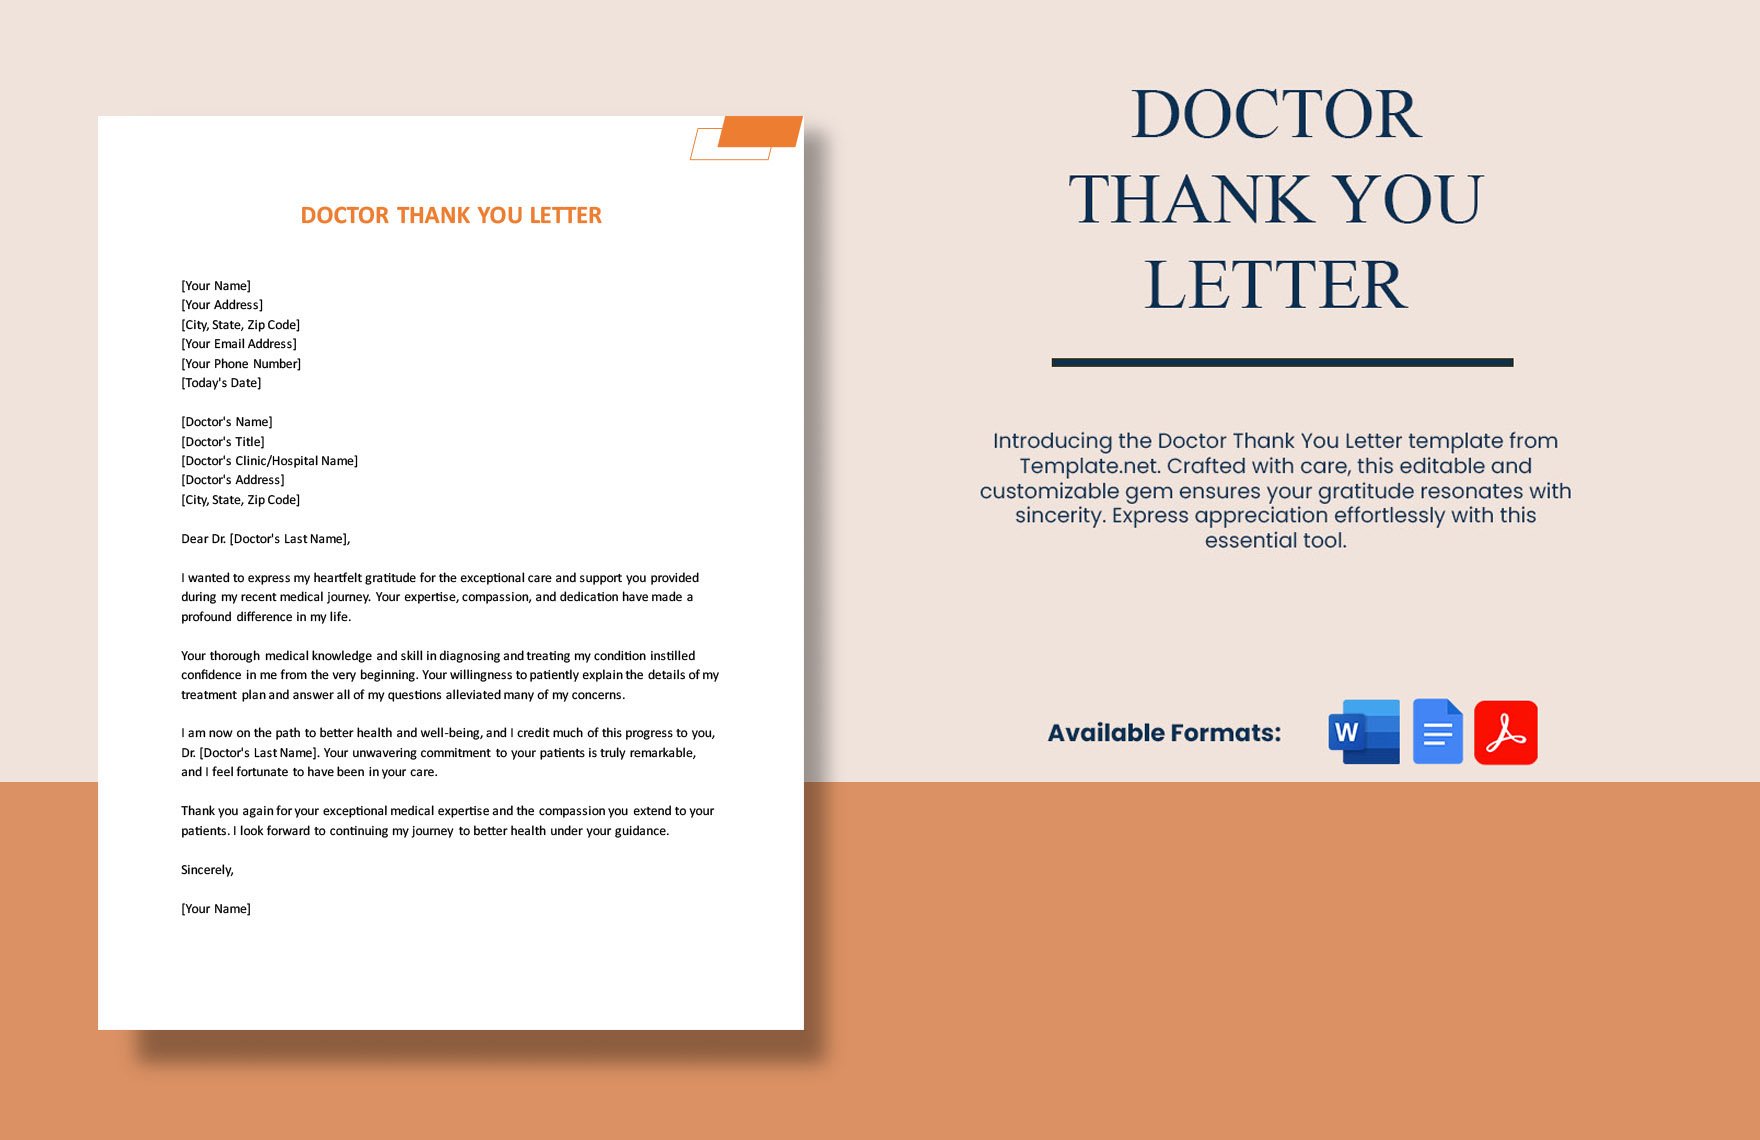 Doctor Thank You Letter in Word, Google Docs, PDF